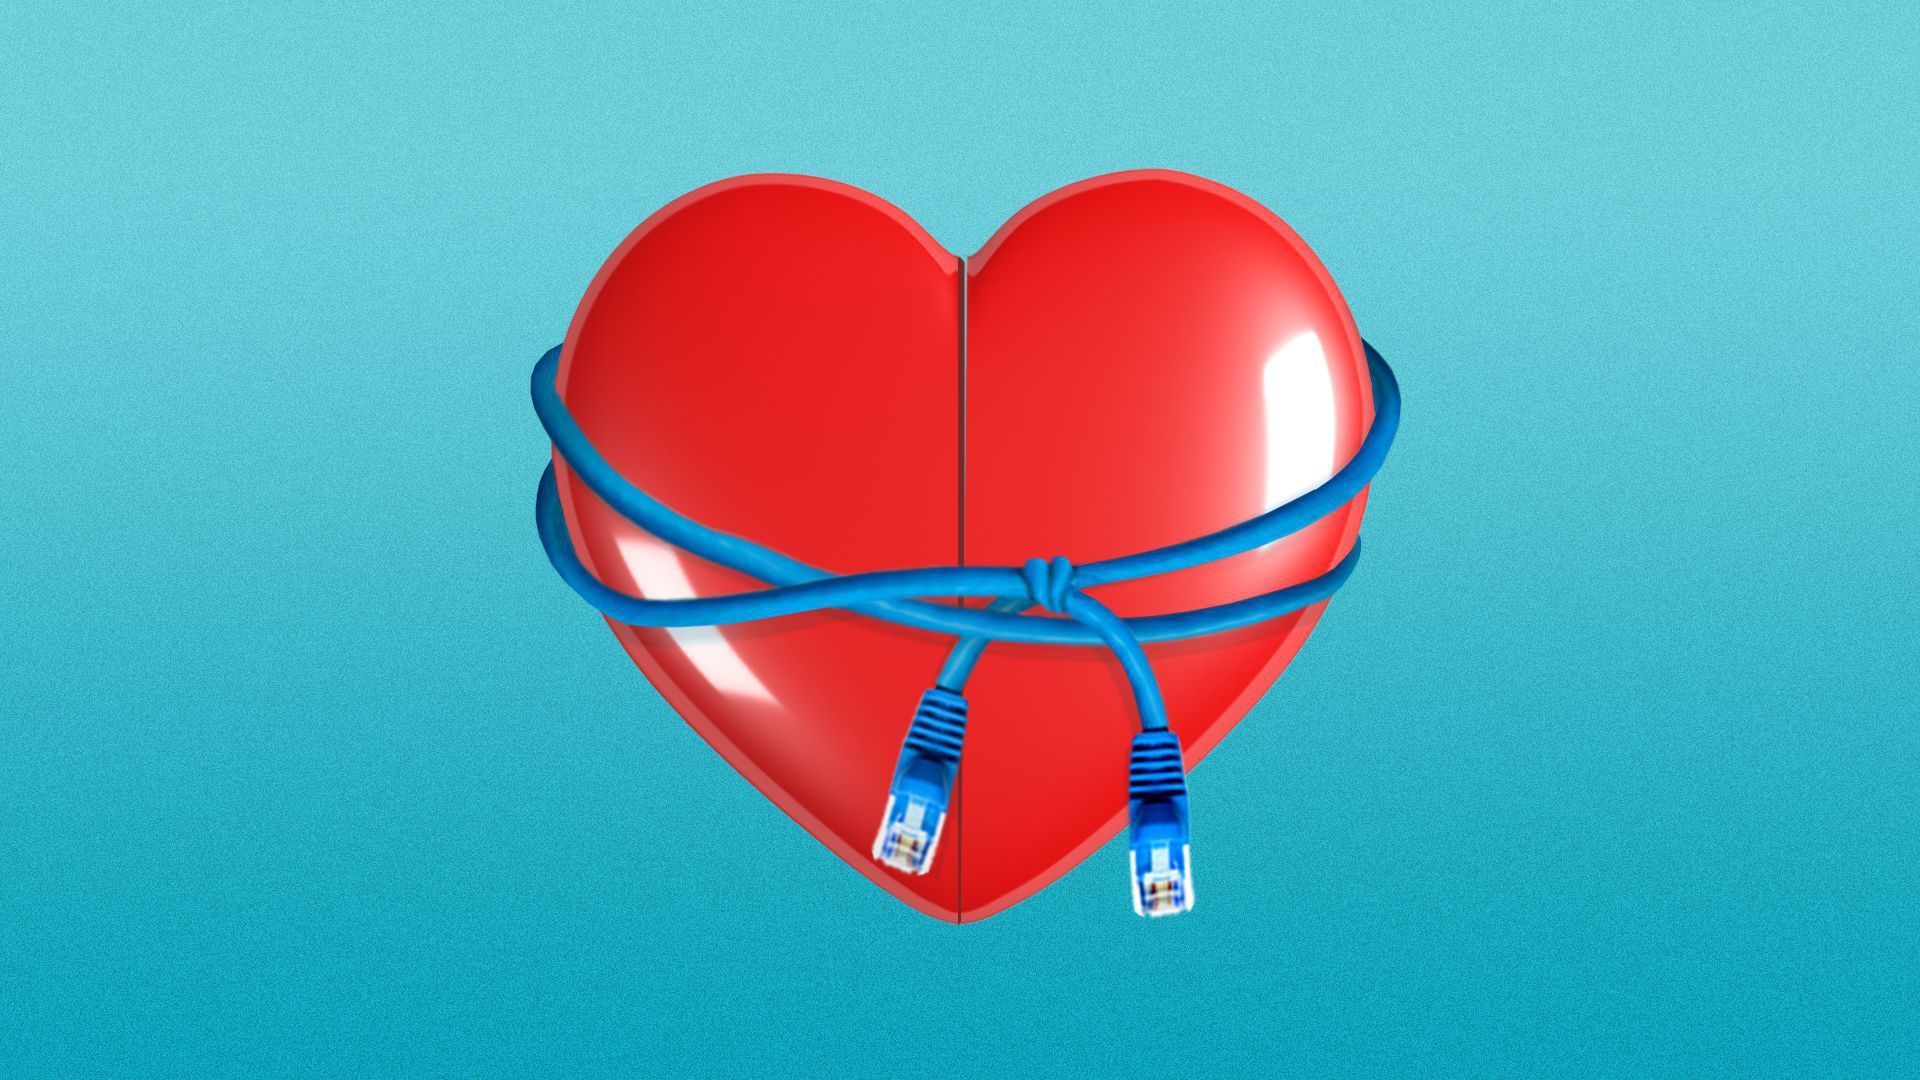 An illustration of a heart with an Ethernet cord wrapped around it